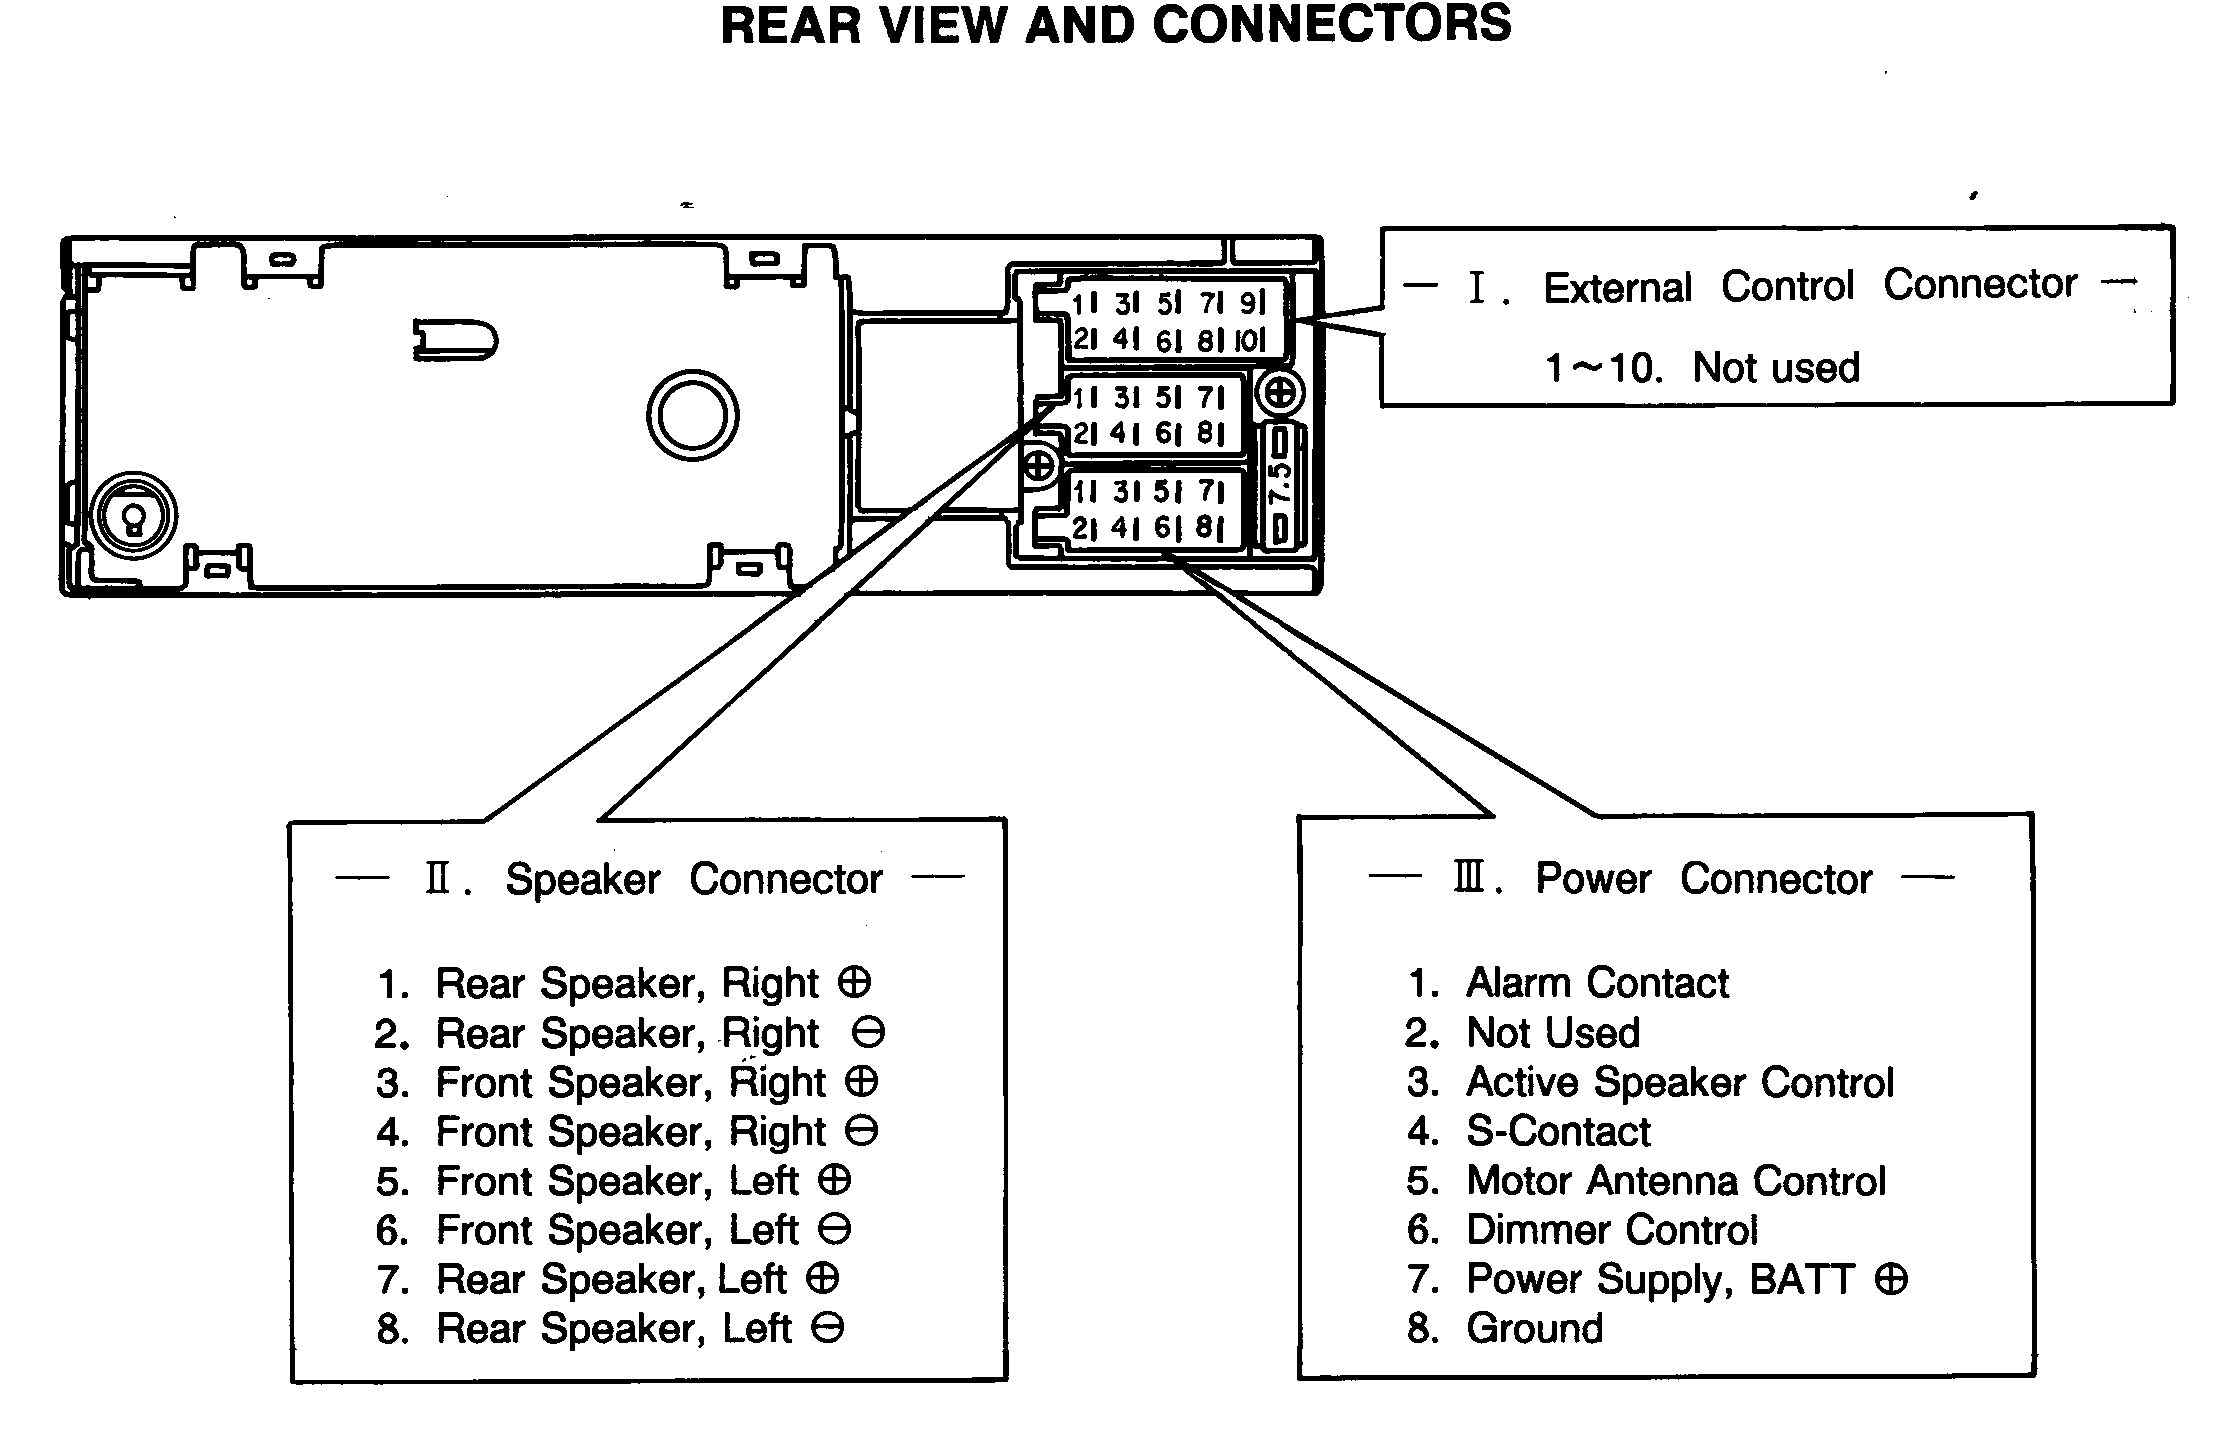 Car Stereo Diagram Wiring from carstereohelp.net